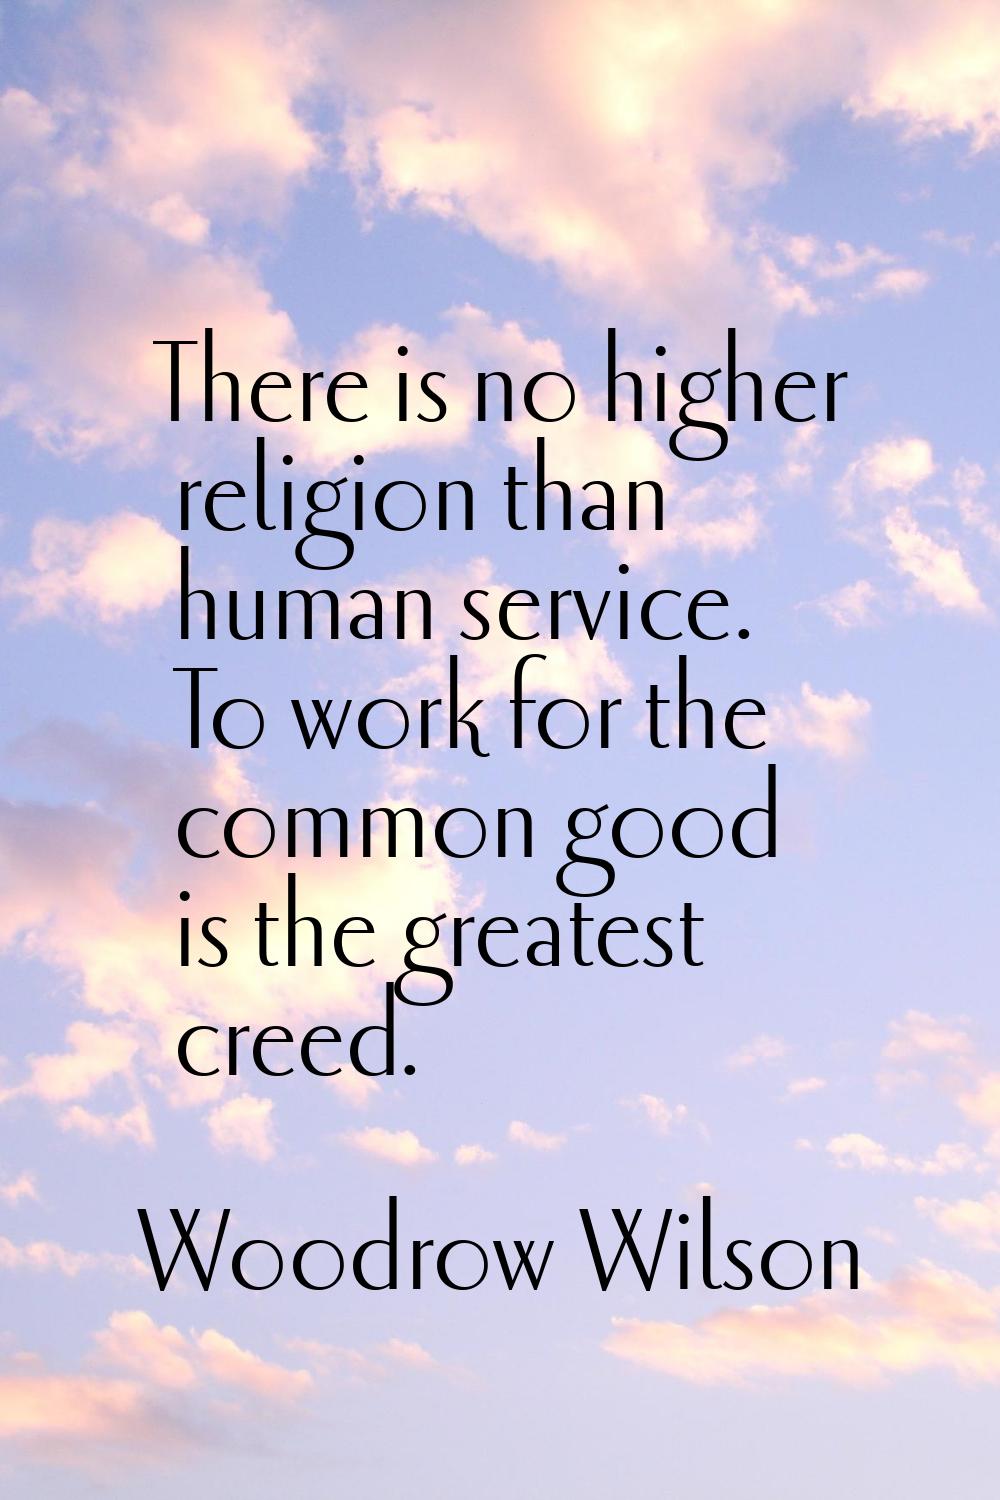 There is no higher religion than human service. To work for the common good is the greatest creed.